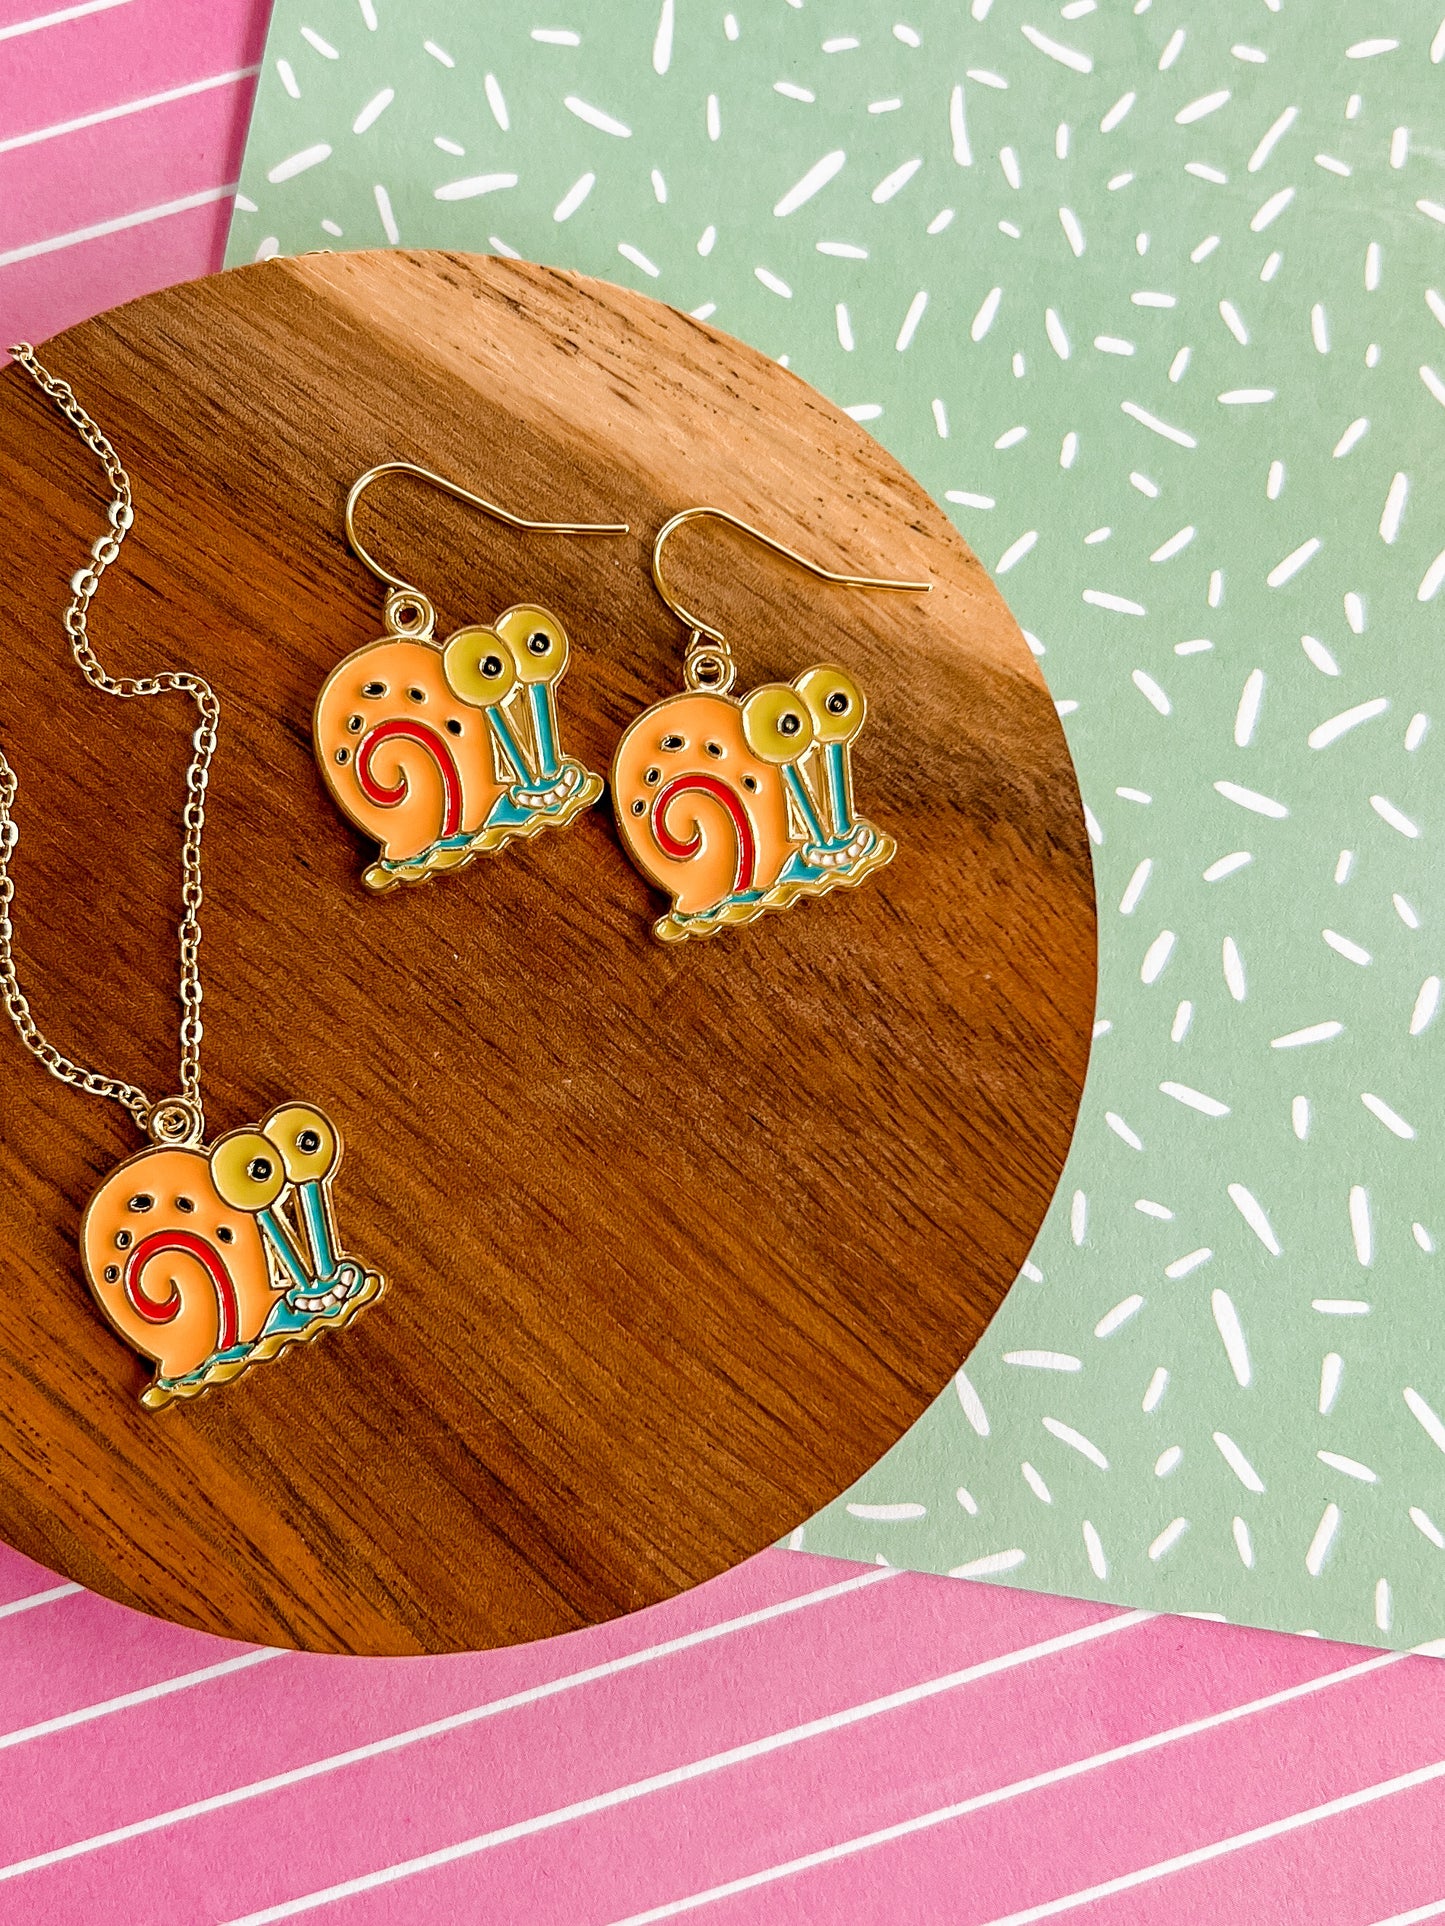 Gary the Snail Necklace and Earrings